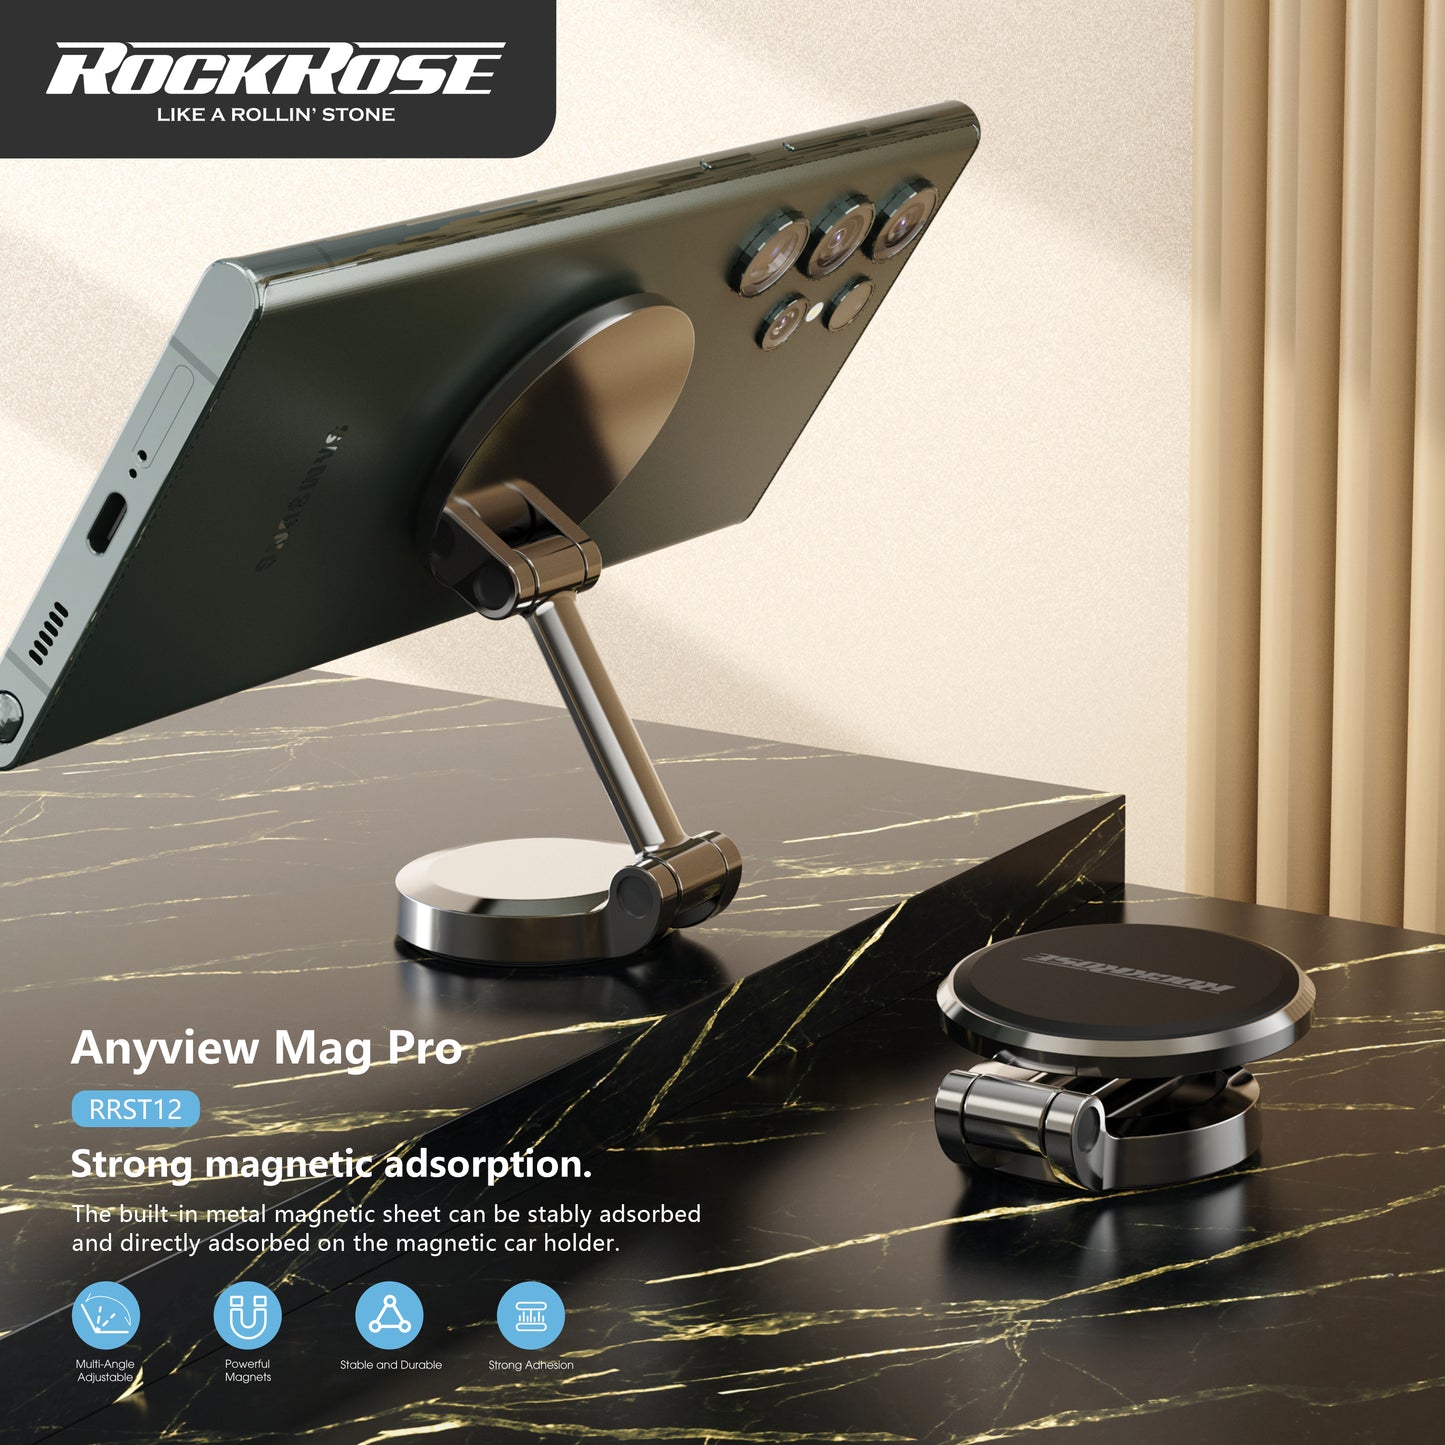 RockRose Anyview Mag Pro 360° Rotatable&Foldable Center Console Magnetic Phone Holder